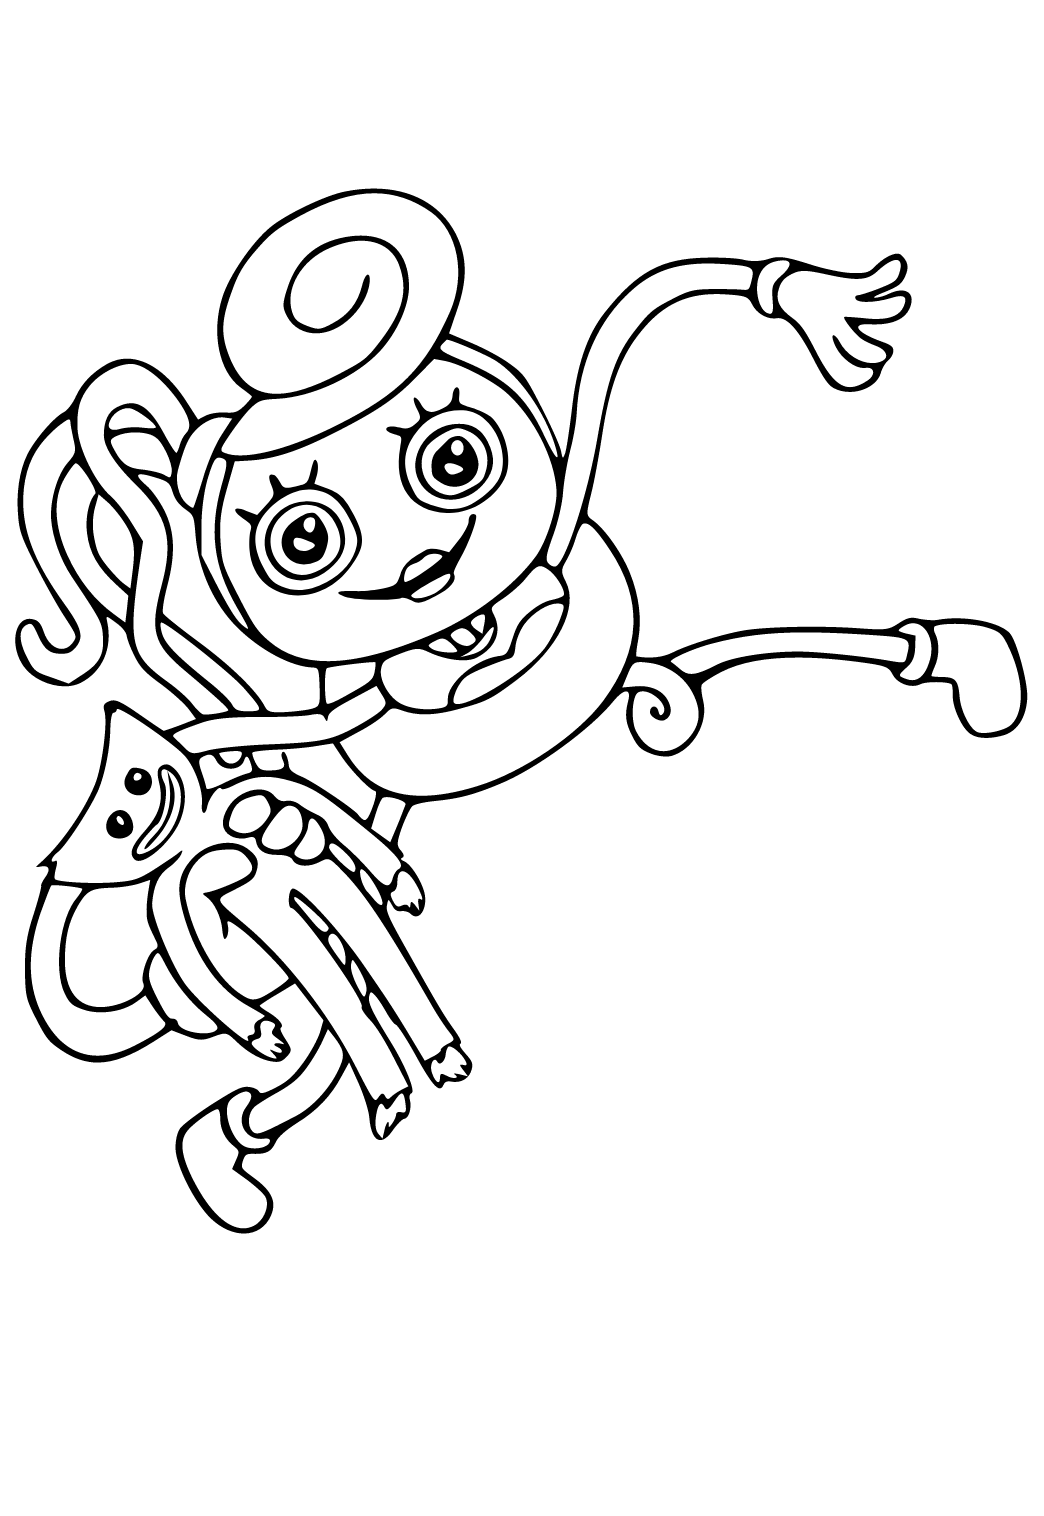 Mommy Long Legs coloring pages - Coloring pages 🎨